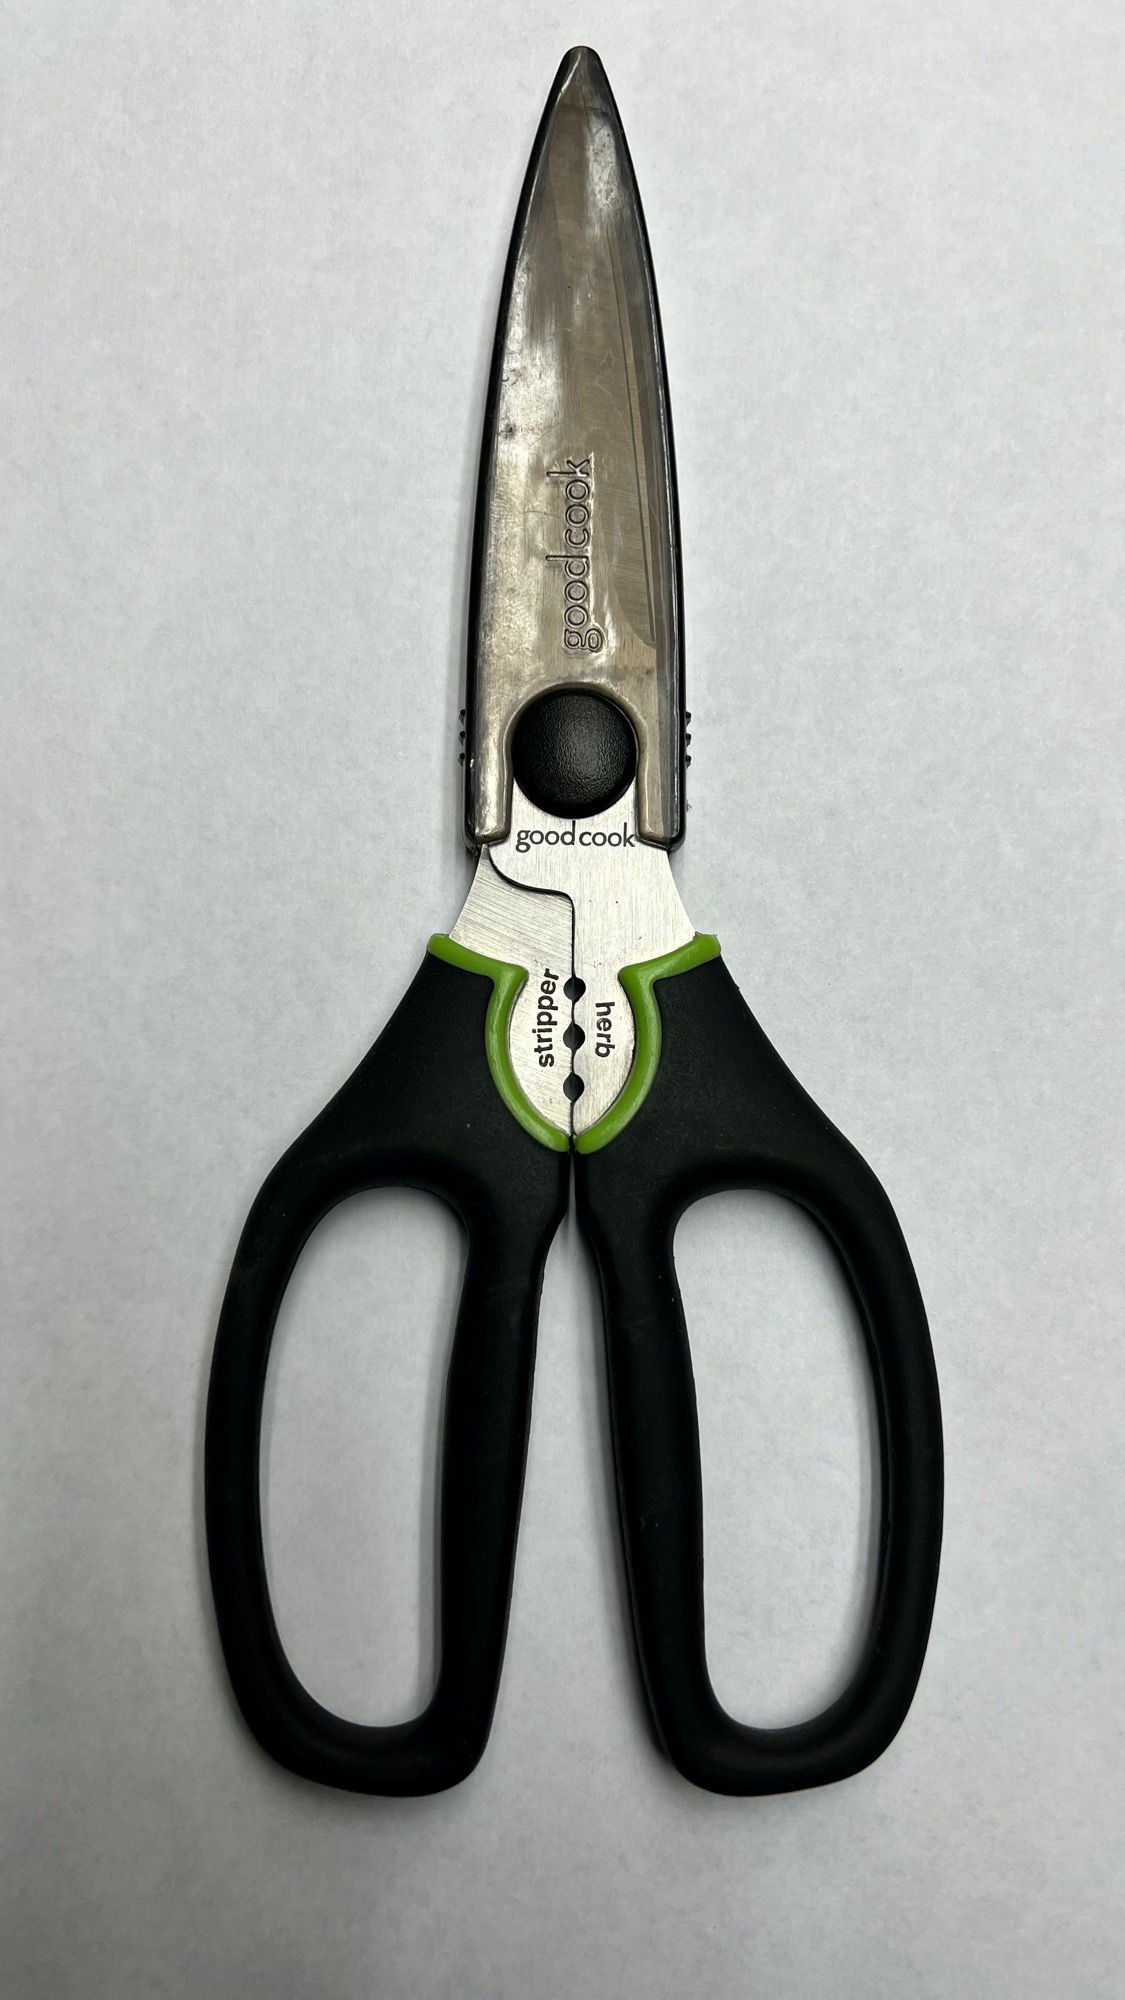 GoodCook Touch Kitchen Shears, Stainless Steel with Non-slip Grip